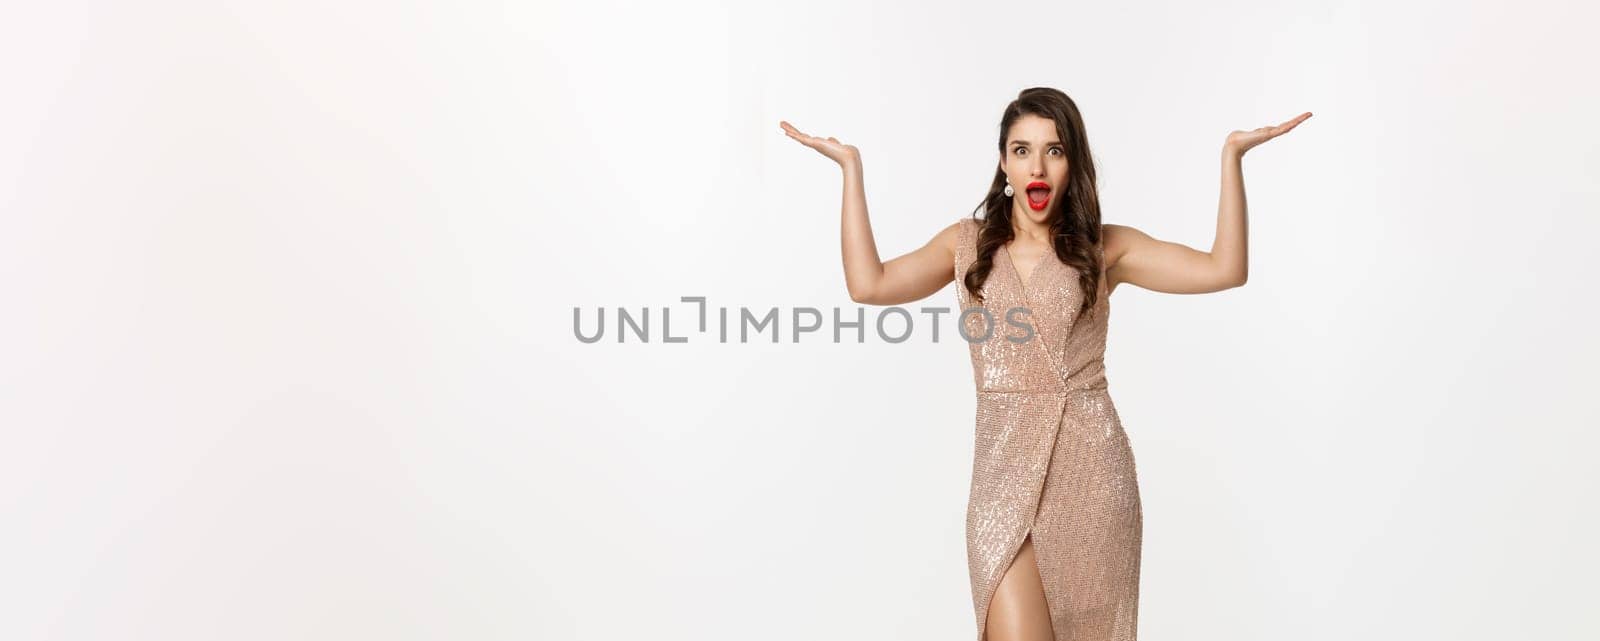 Party and celebration concept. Full-length of beautiful woman in elegant dress, standing near Christmas gifts and looking surprised, standing over white background.